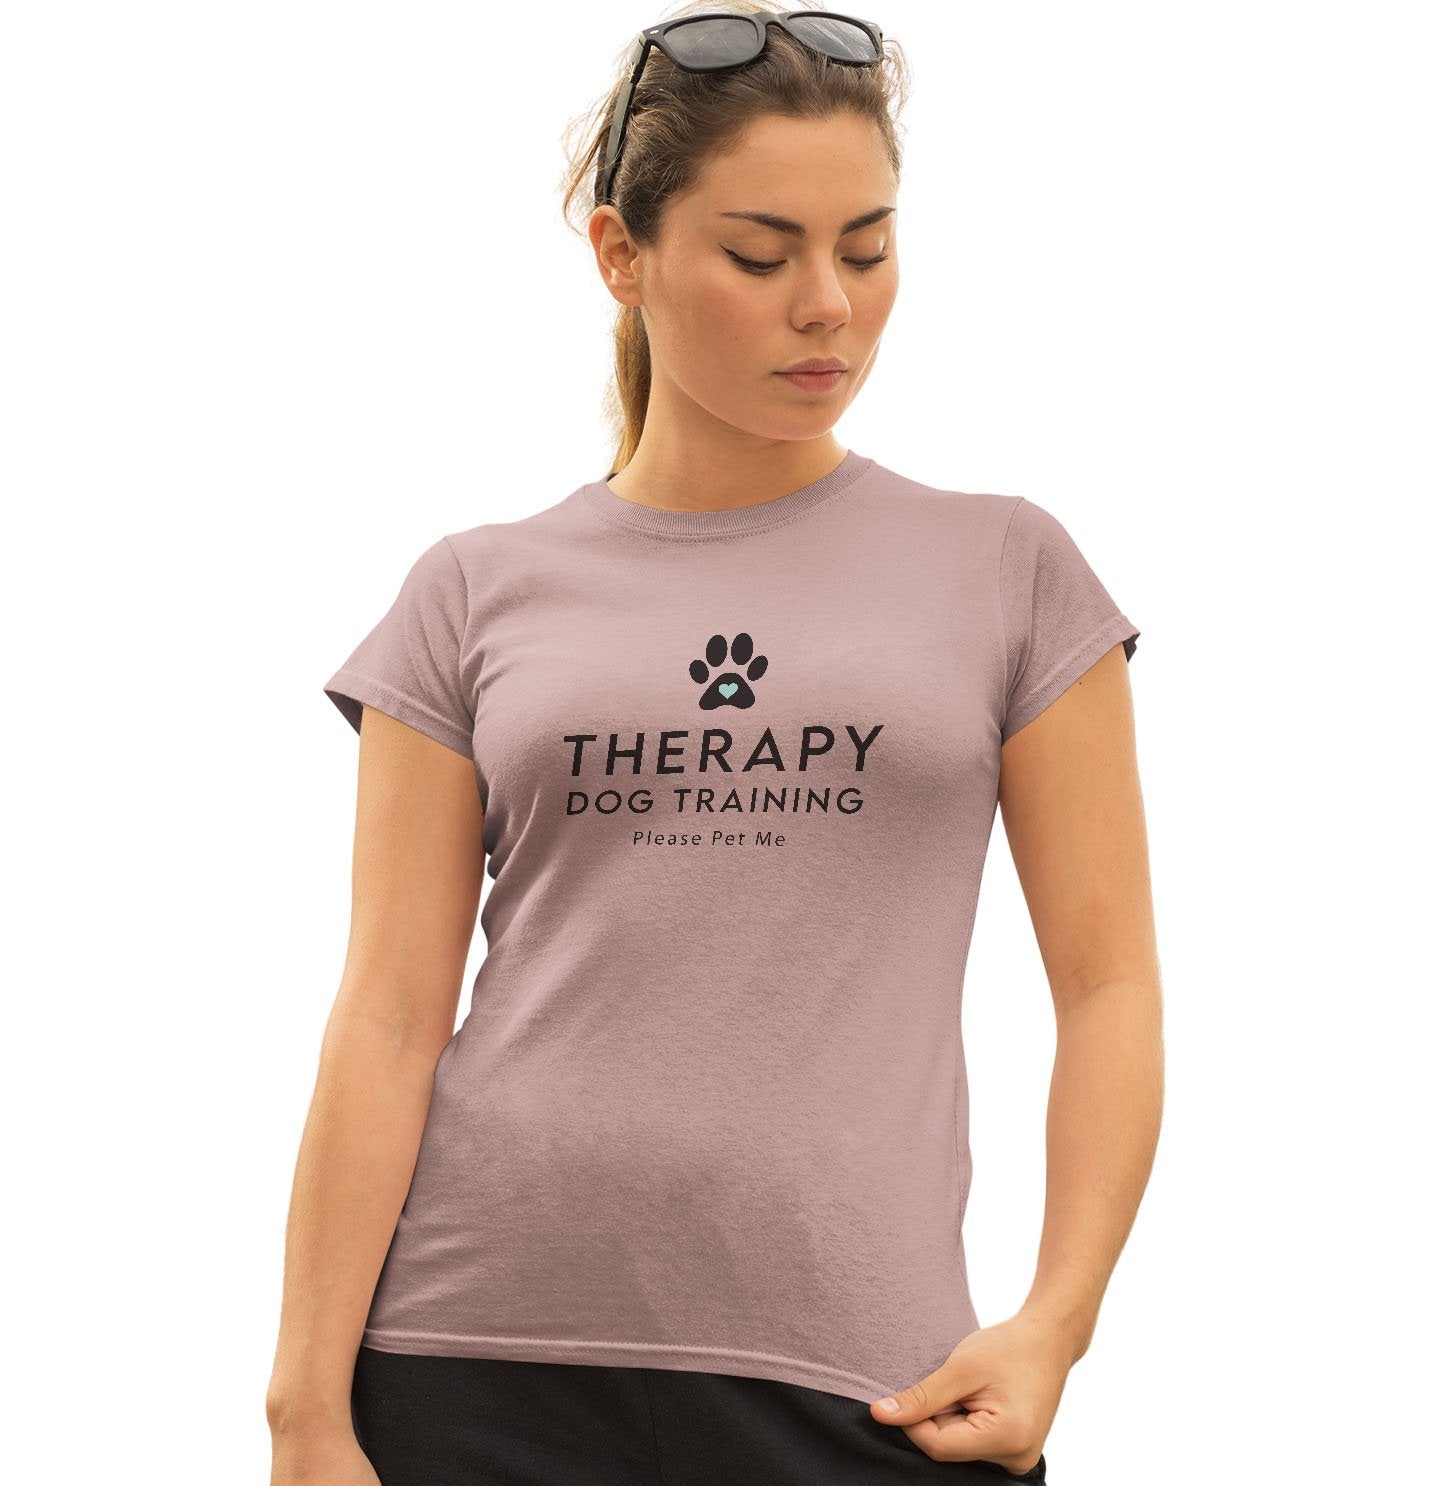 Therapy Dog Training - Women's Fitted T-Shirt